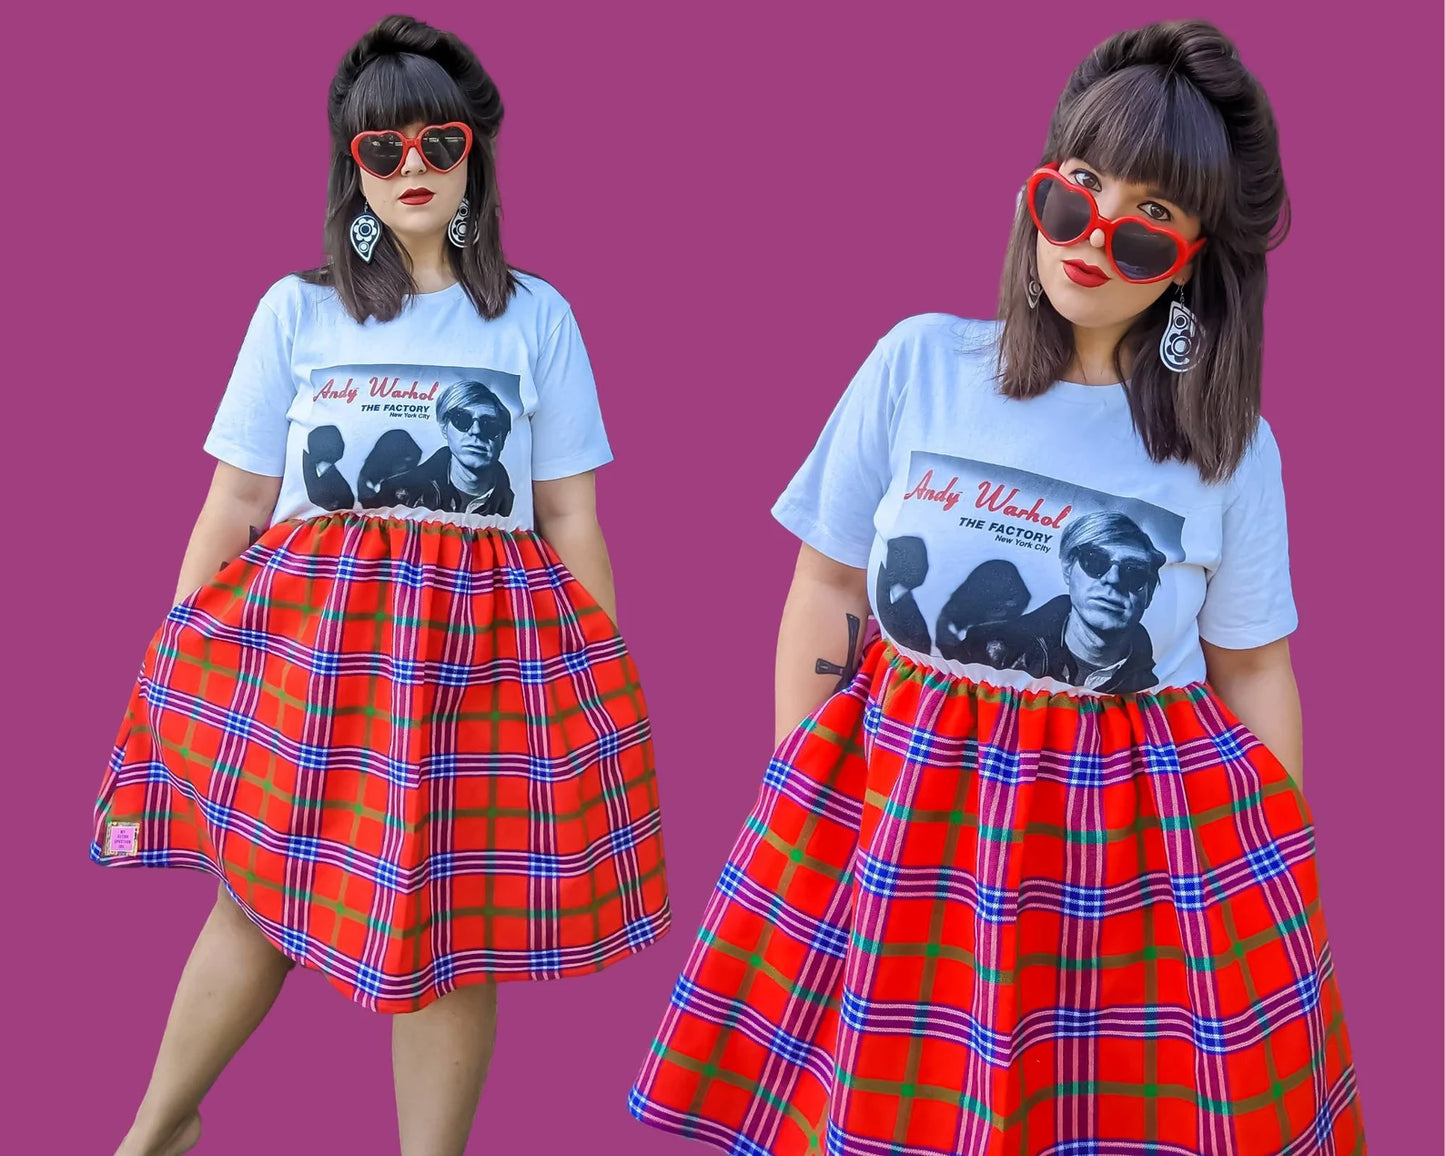 Handmade, Upcycled Andy Warhol and The Factory T-Shirt Dress, Vintage 1990's Red Plaid Skirt Size M-L